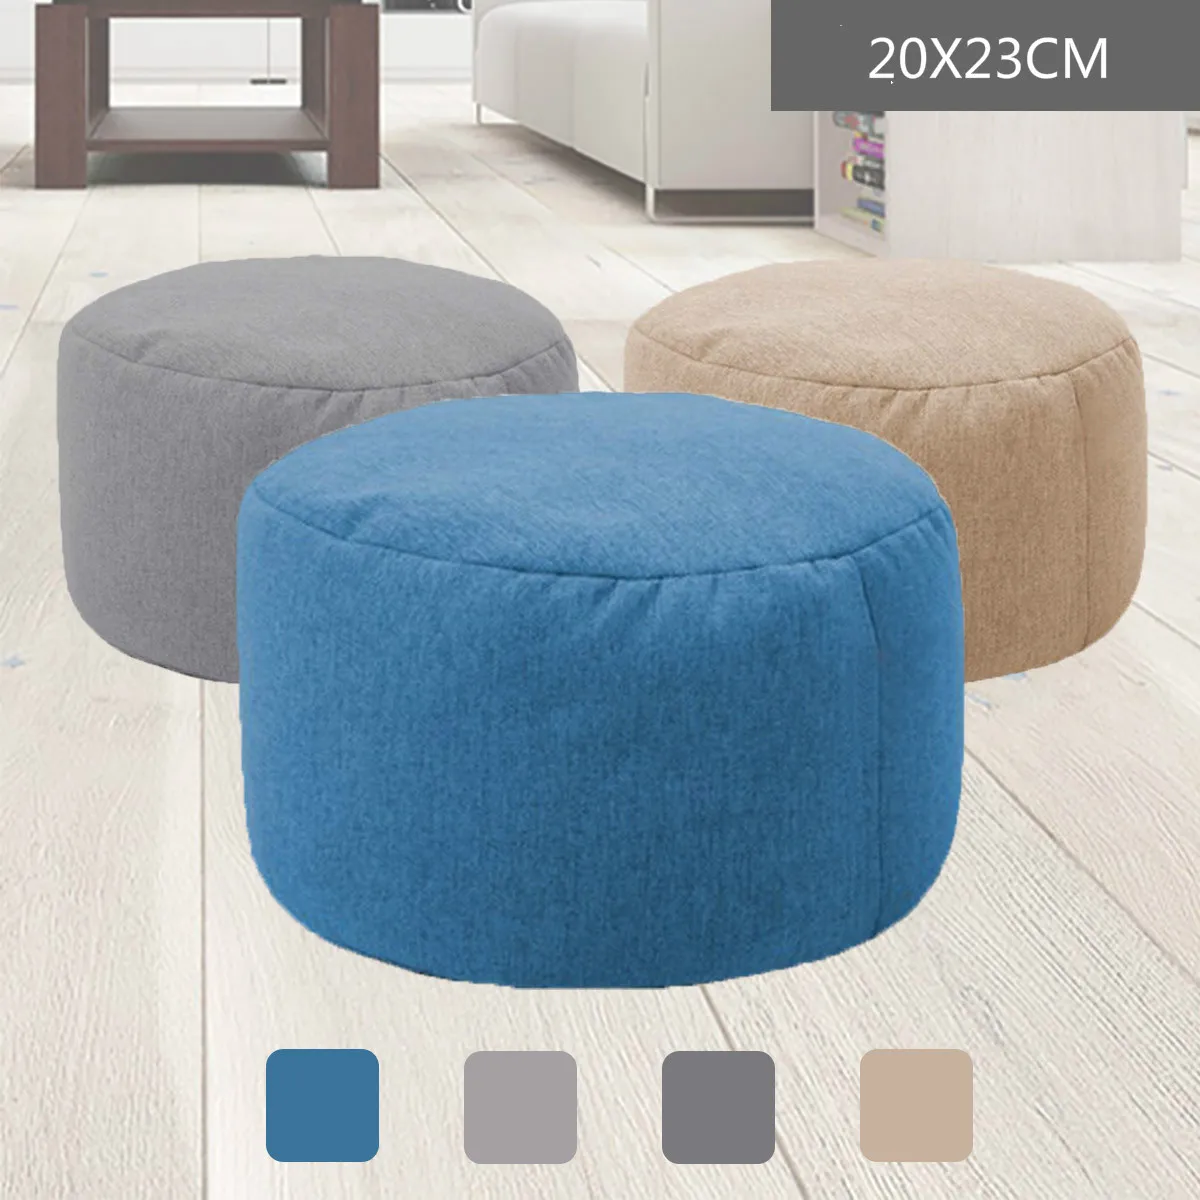 Small Round Lazy Bean Bag Sofa Cover Footrest Stool Ottoman Pouf Kids Stuffed Toy Storage Bag Without Filler Cottom Ottoman Hemp